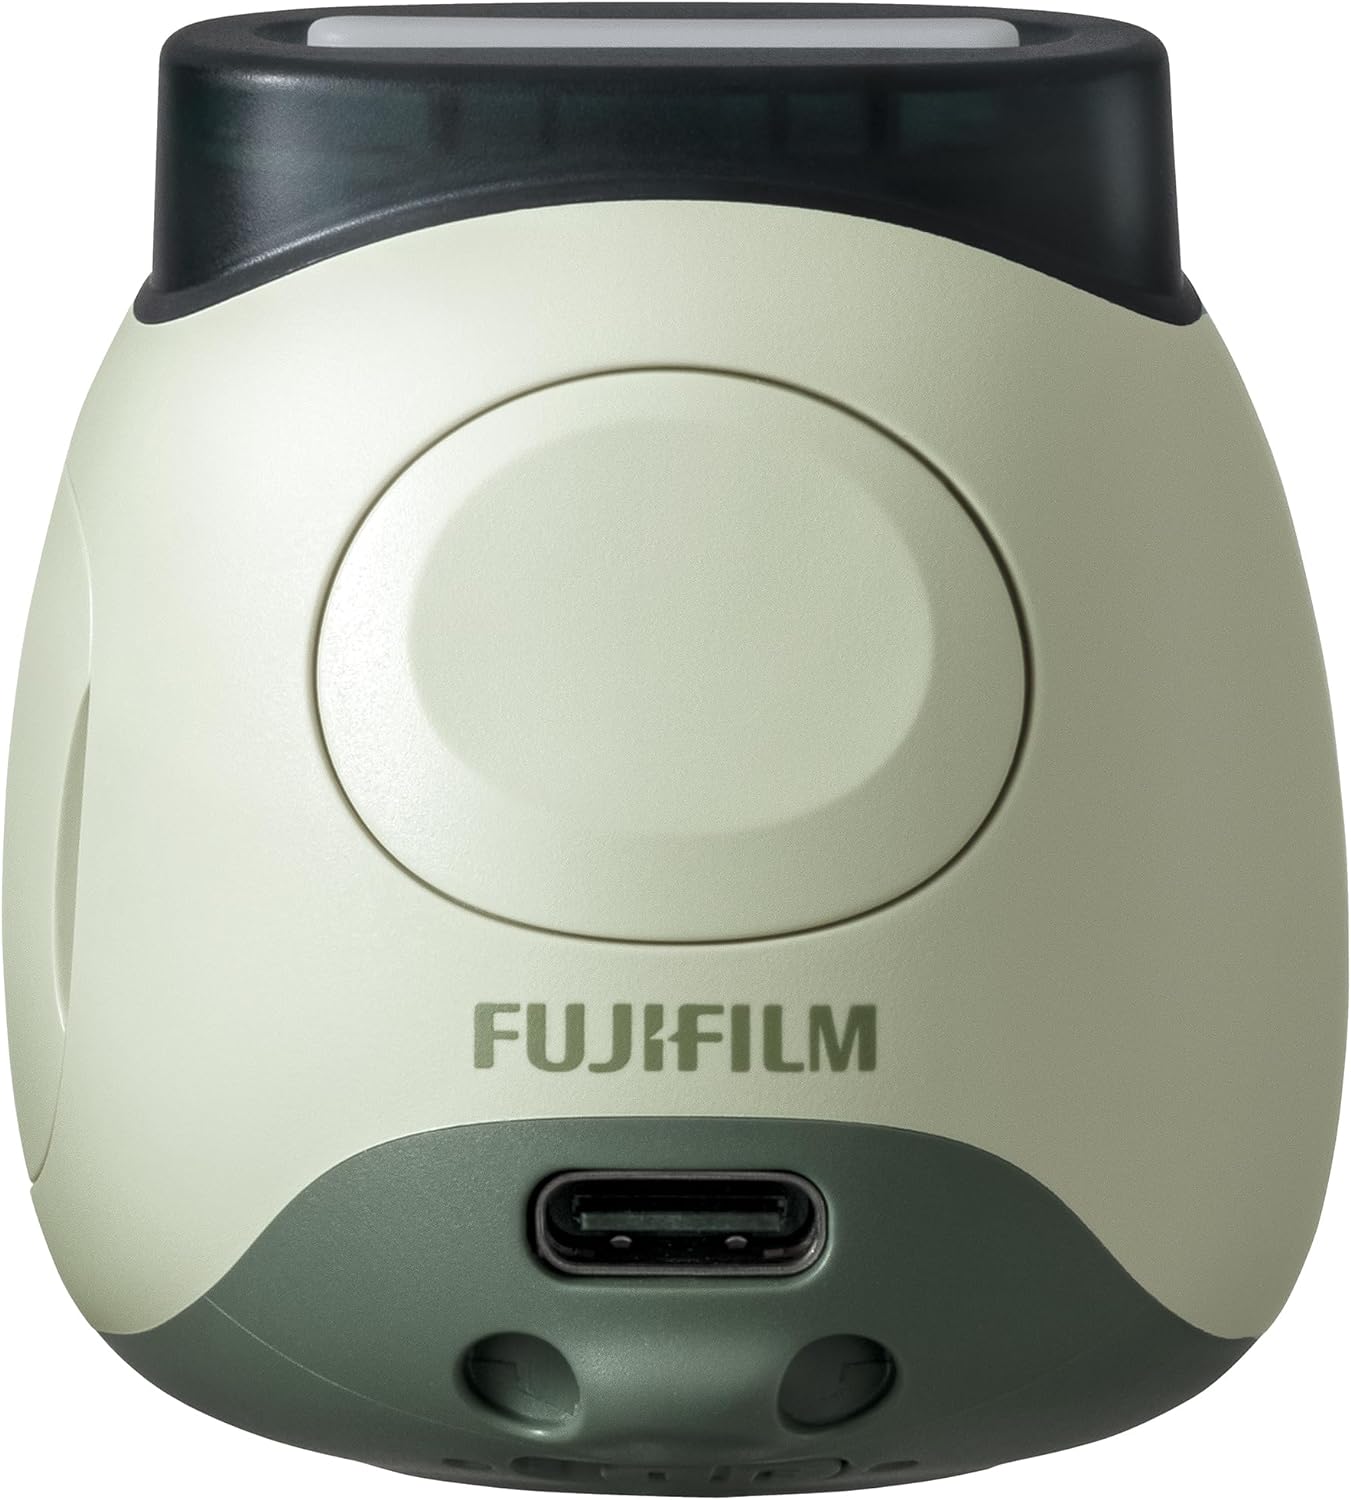 Fujifilm Instax PAL with Link 2 Smartphone Wireless Printerm and 10 Pack Film Bundle, Green - image 5 of 9